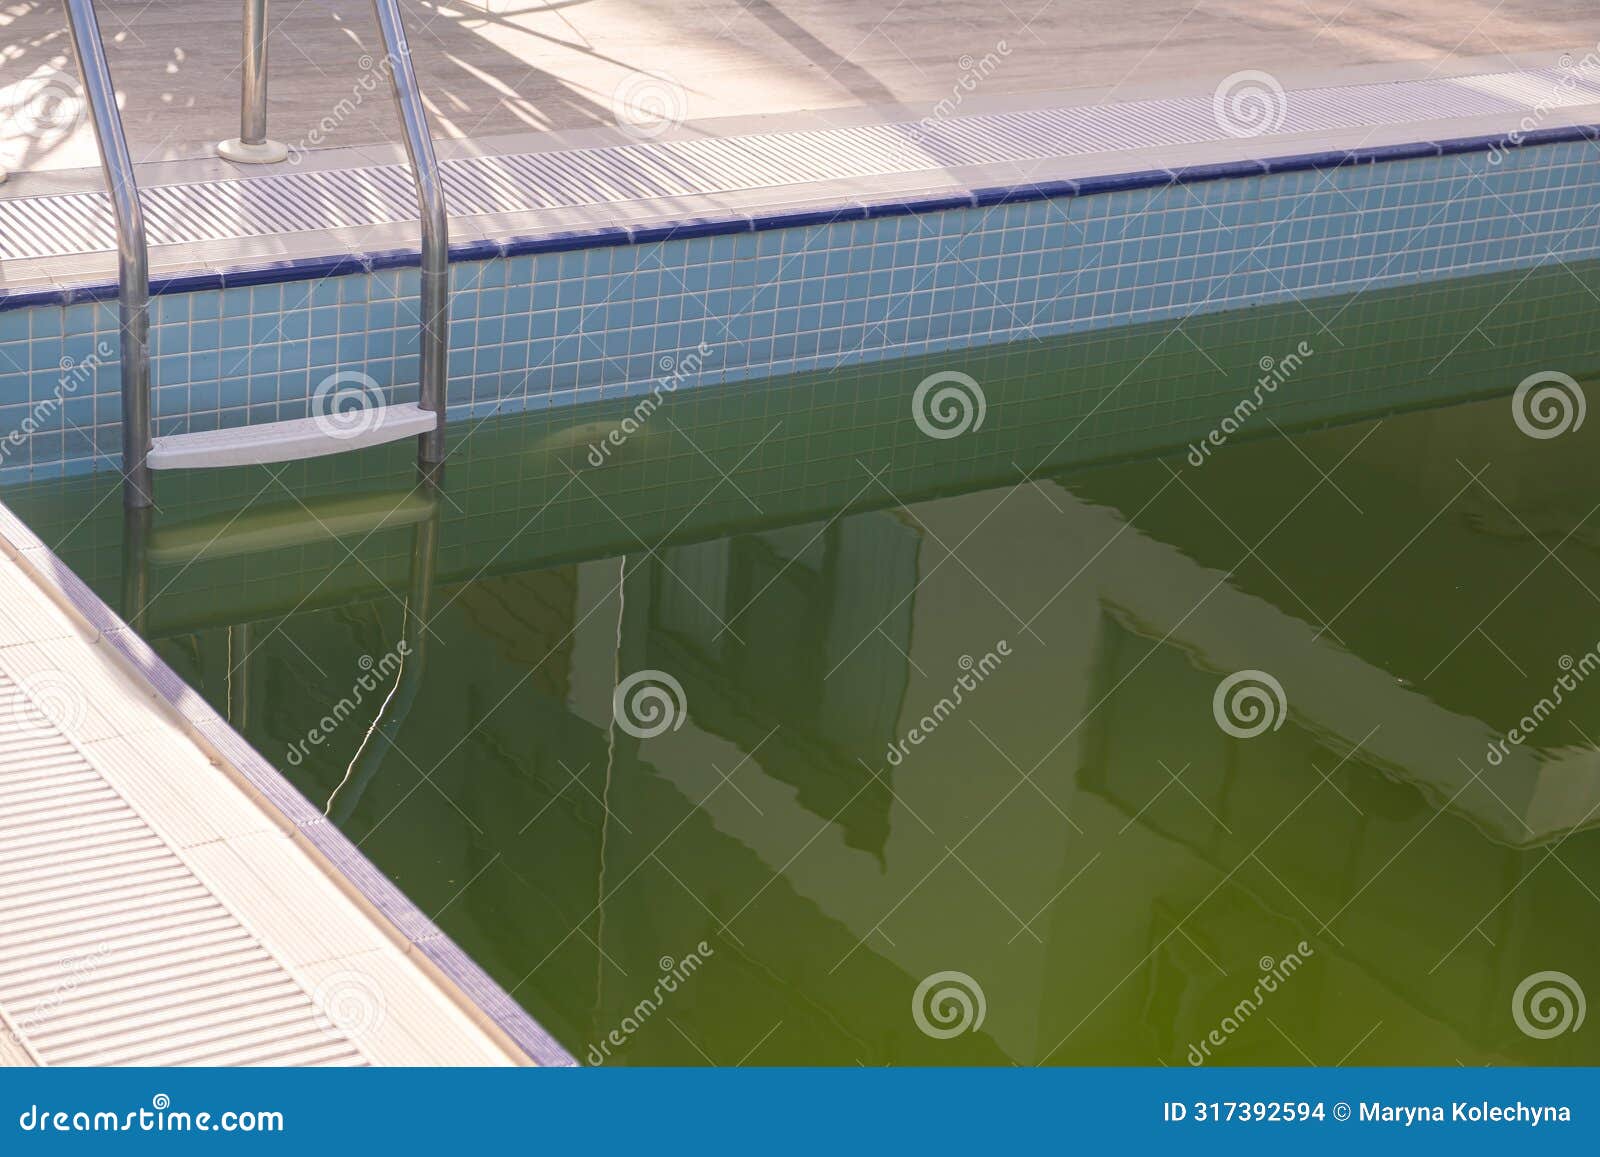 dirty swimming pool with green water. a close-up view of a neglected swimming pool with murky green water, reflecting its